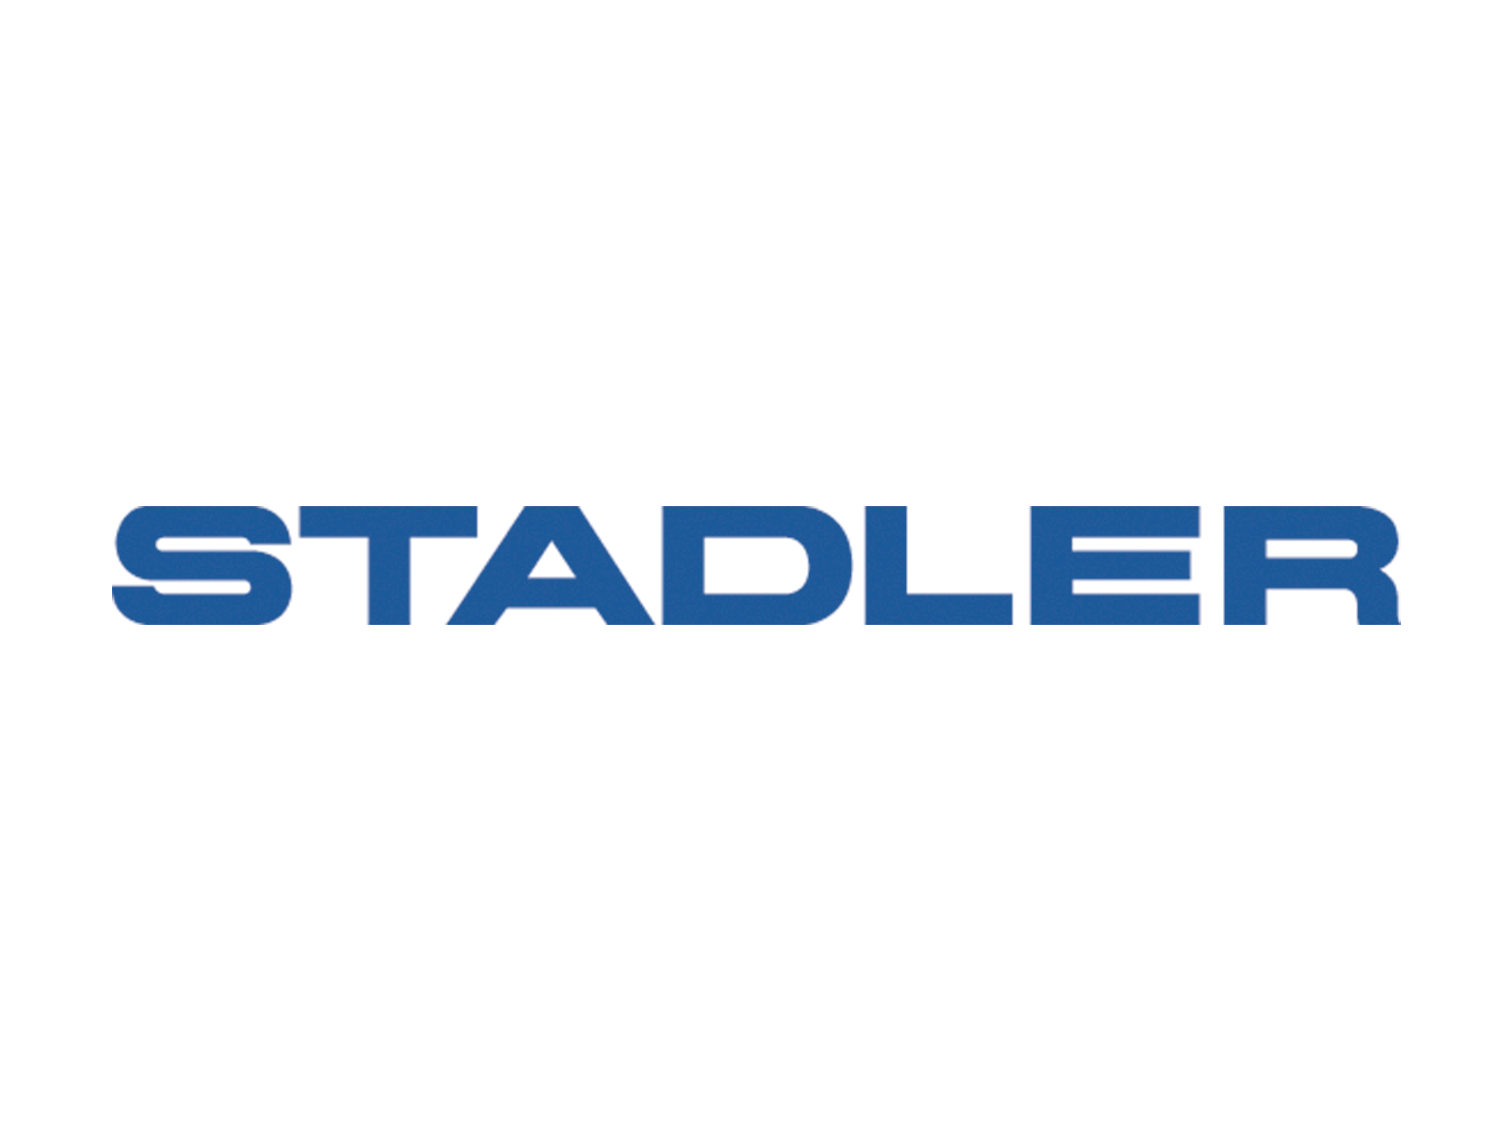 New order from Stadler Rail for the BLS project 